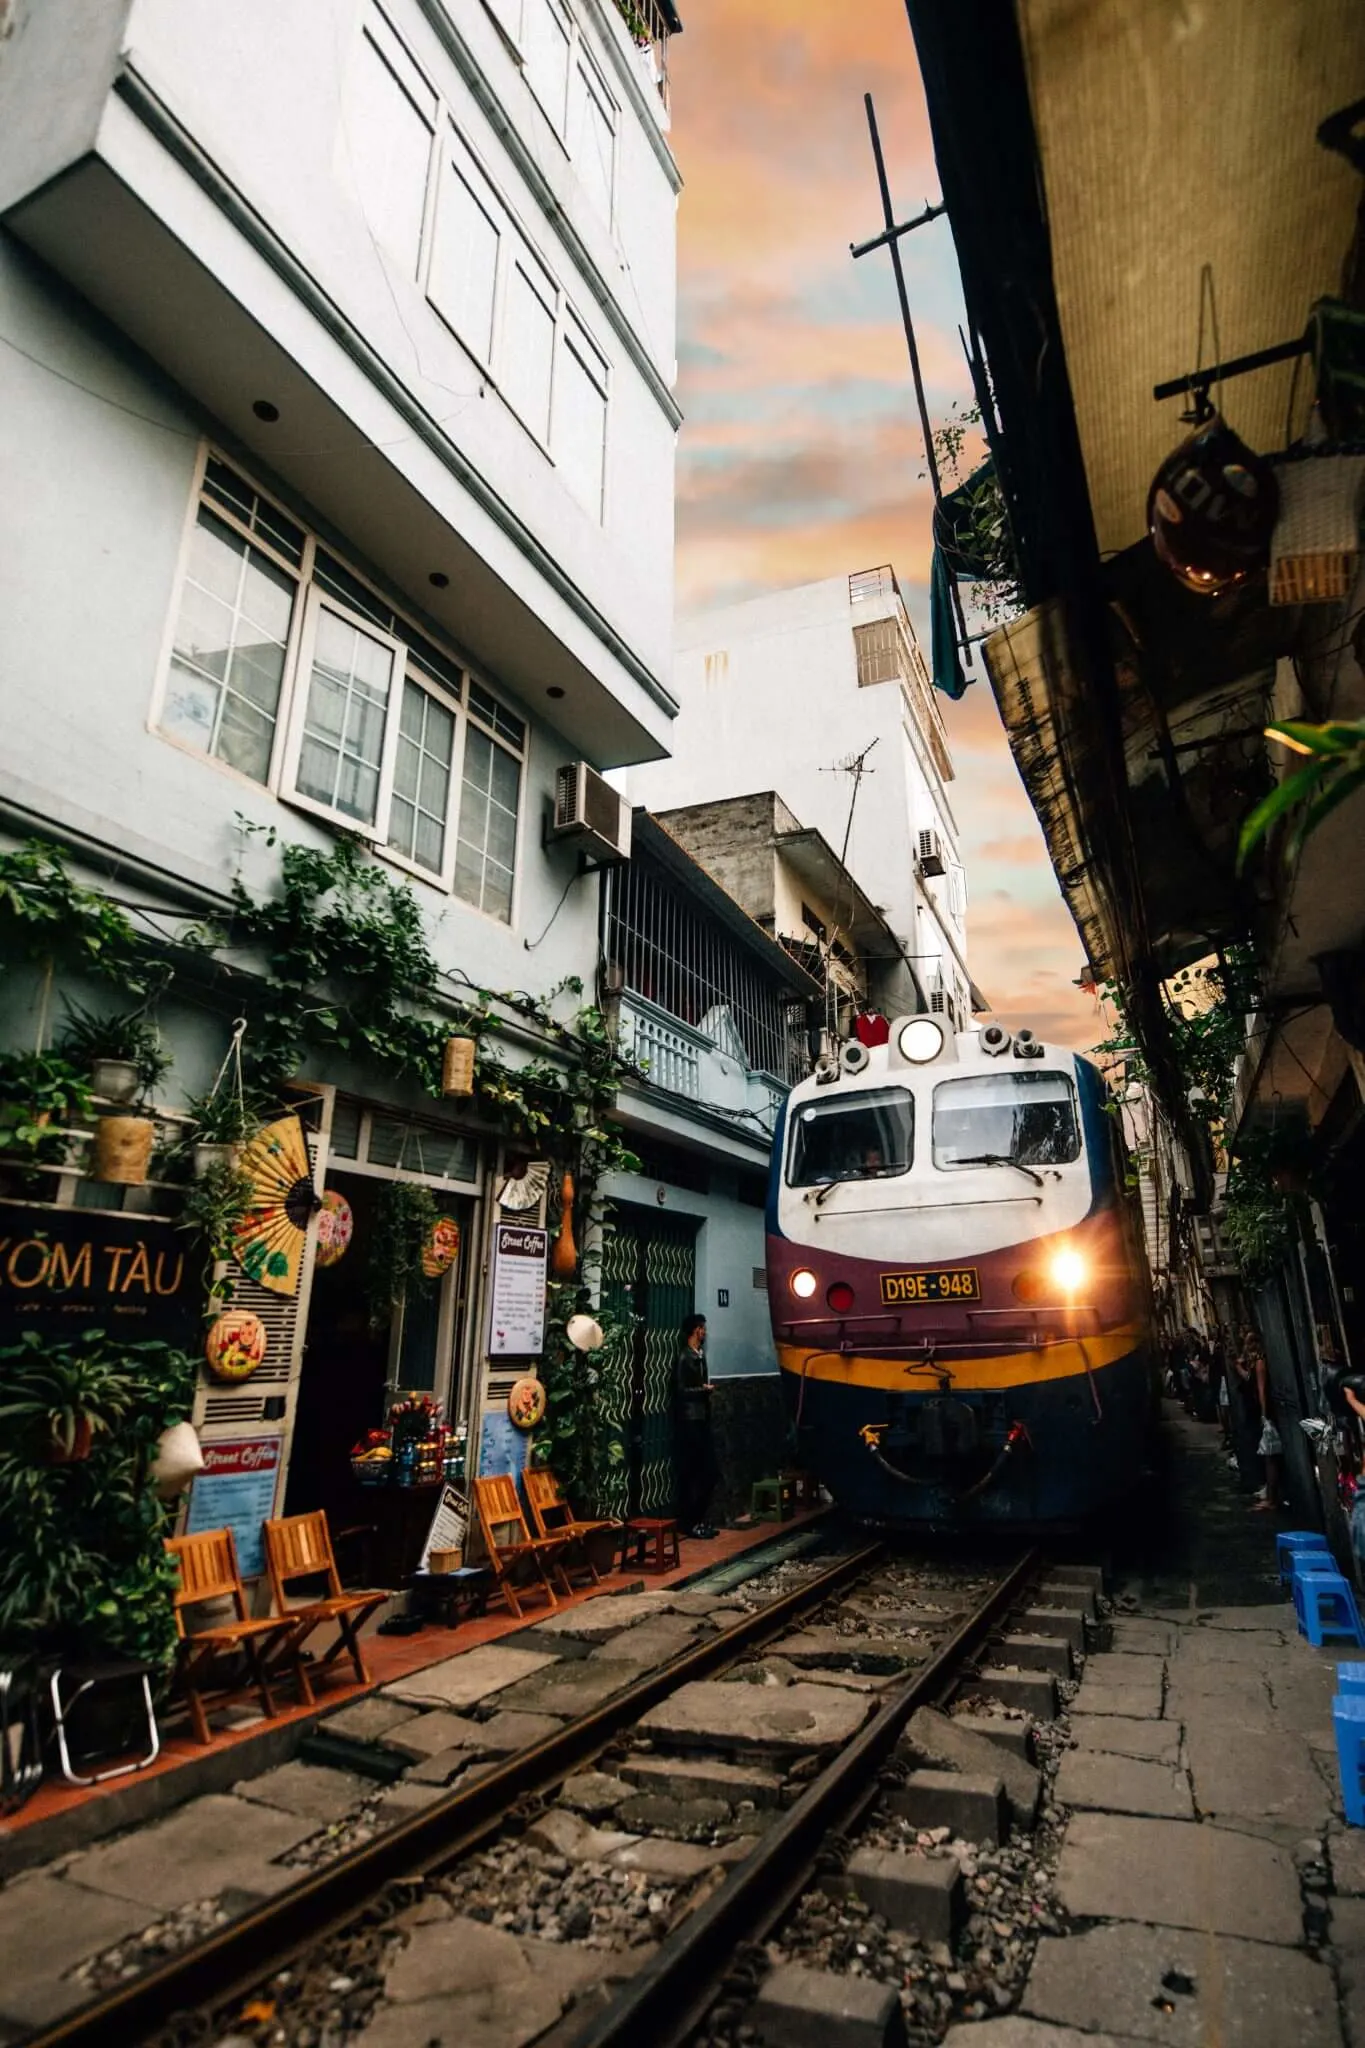 Gering Amuseren slikken What You Need to Know About 'Sleeping' on Vietnam's Overnight Trains